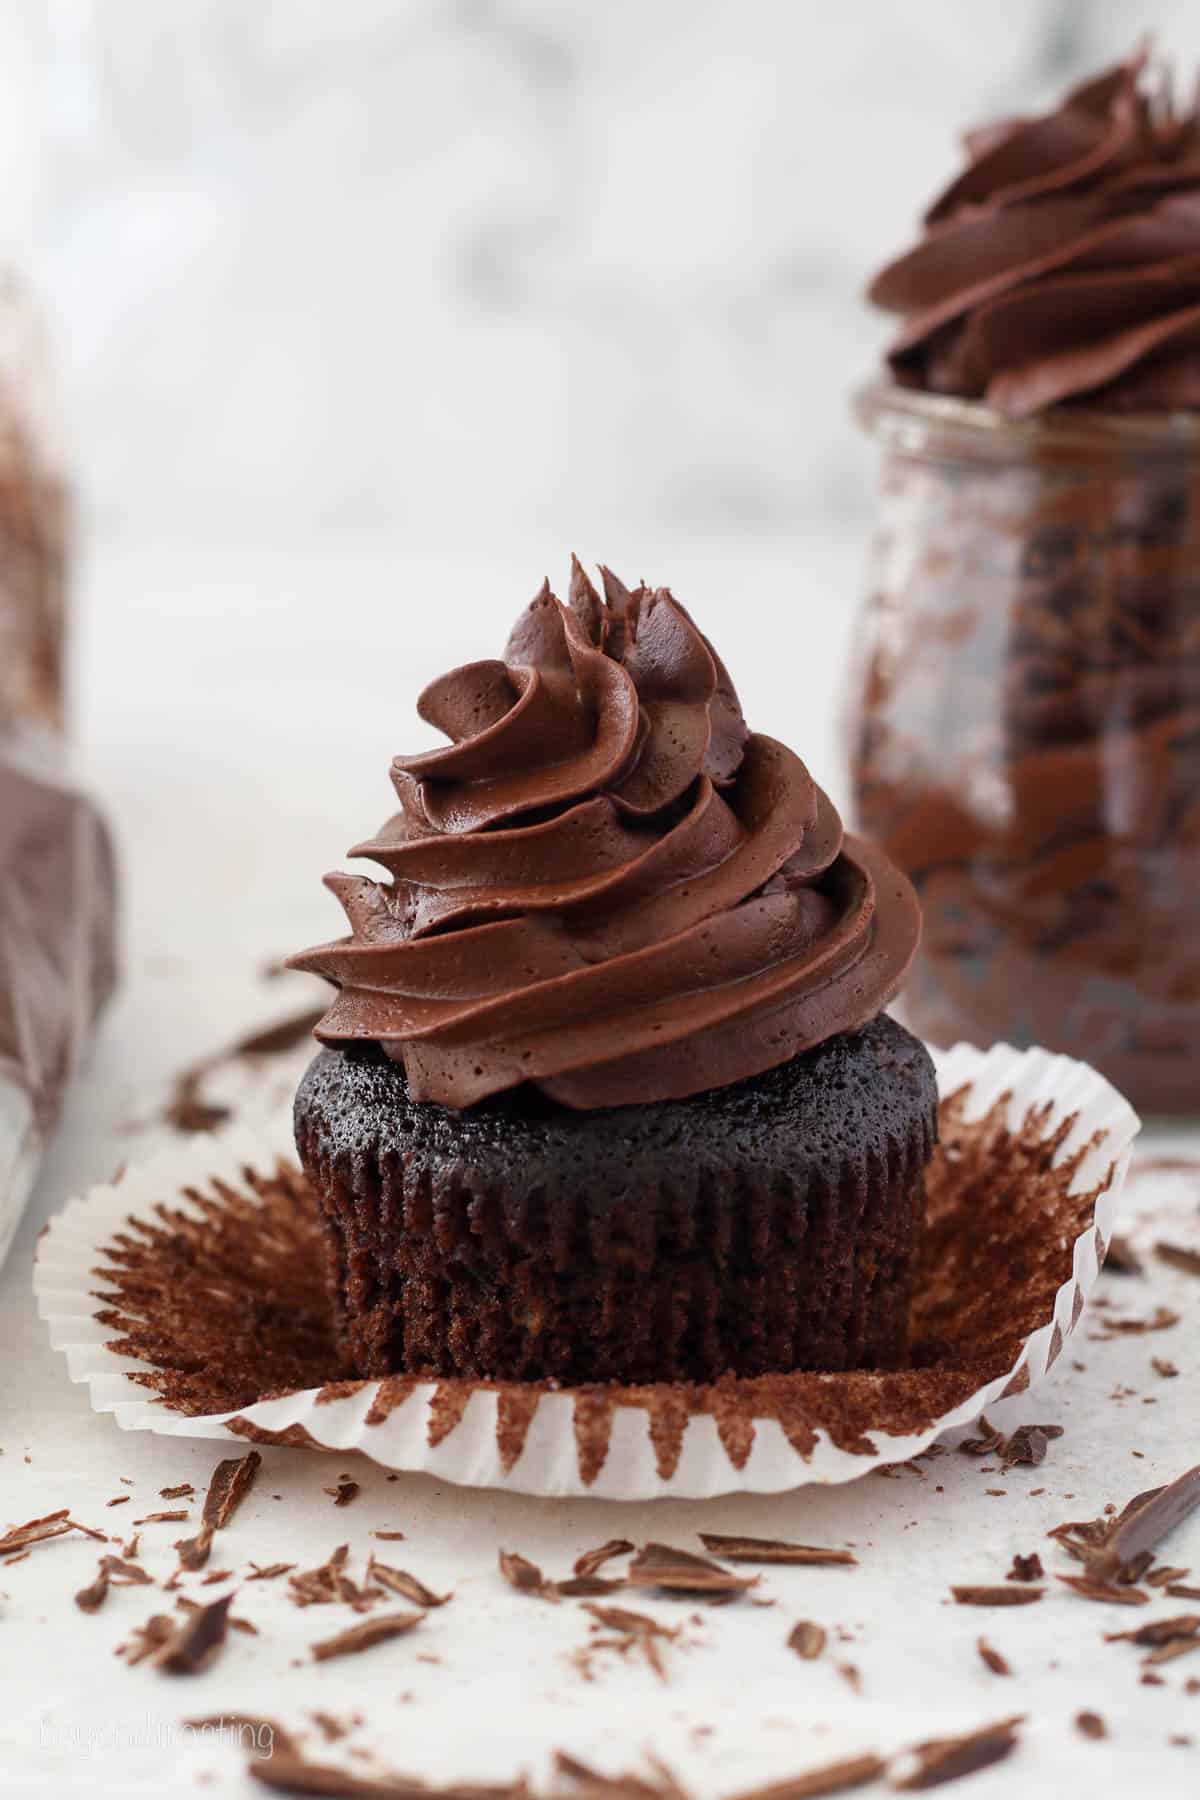 An unwrapped chocolate cupcake topped with a swirl of whipped ganache frosting.